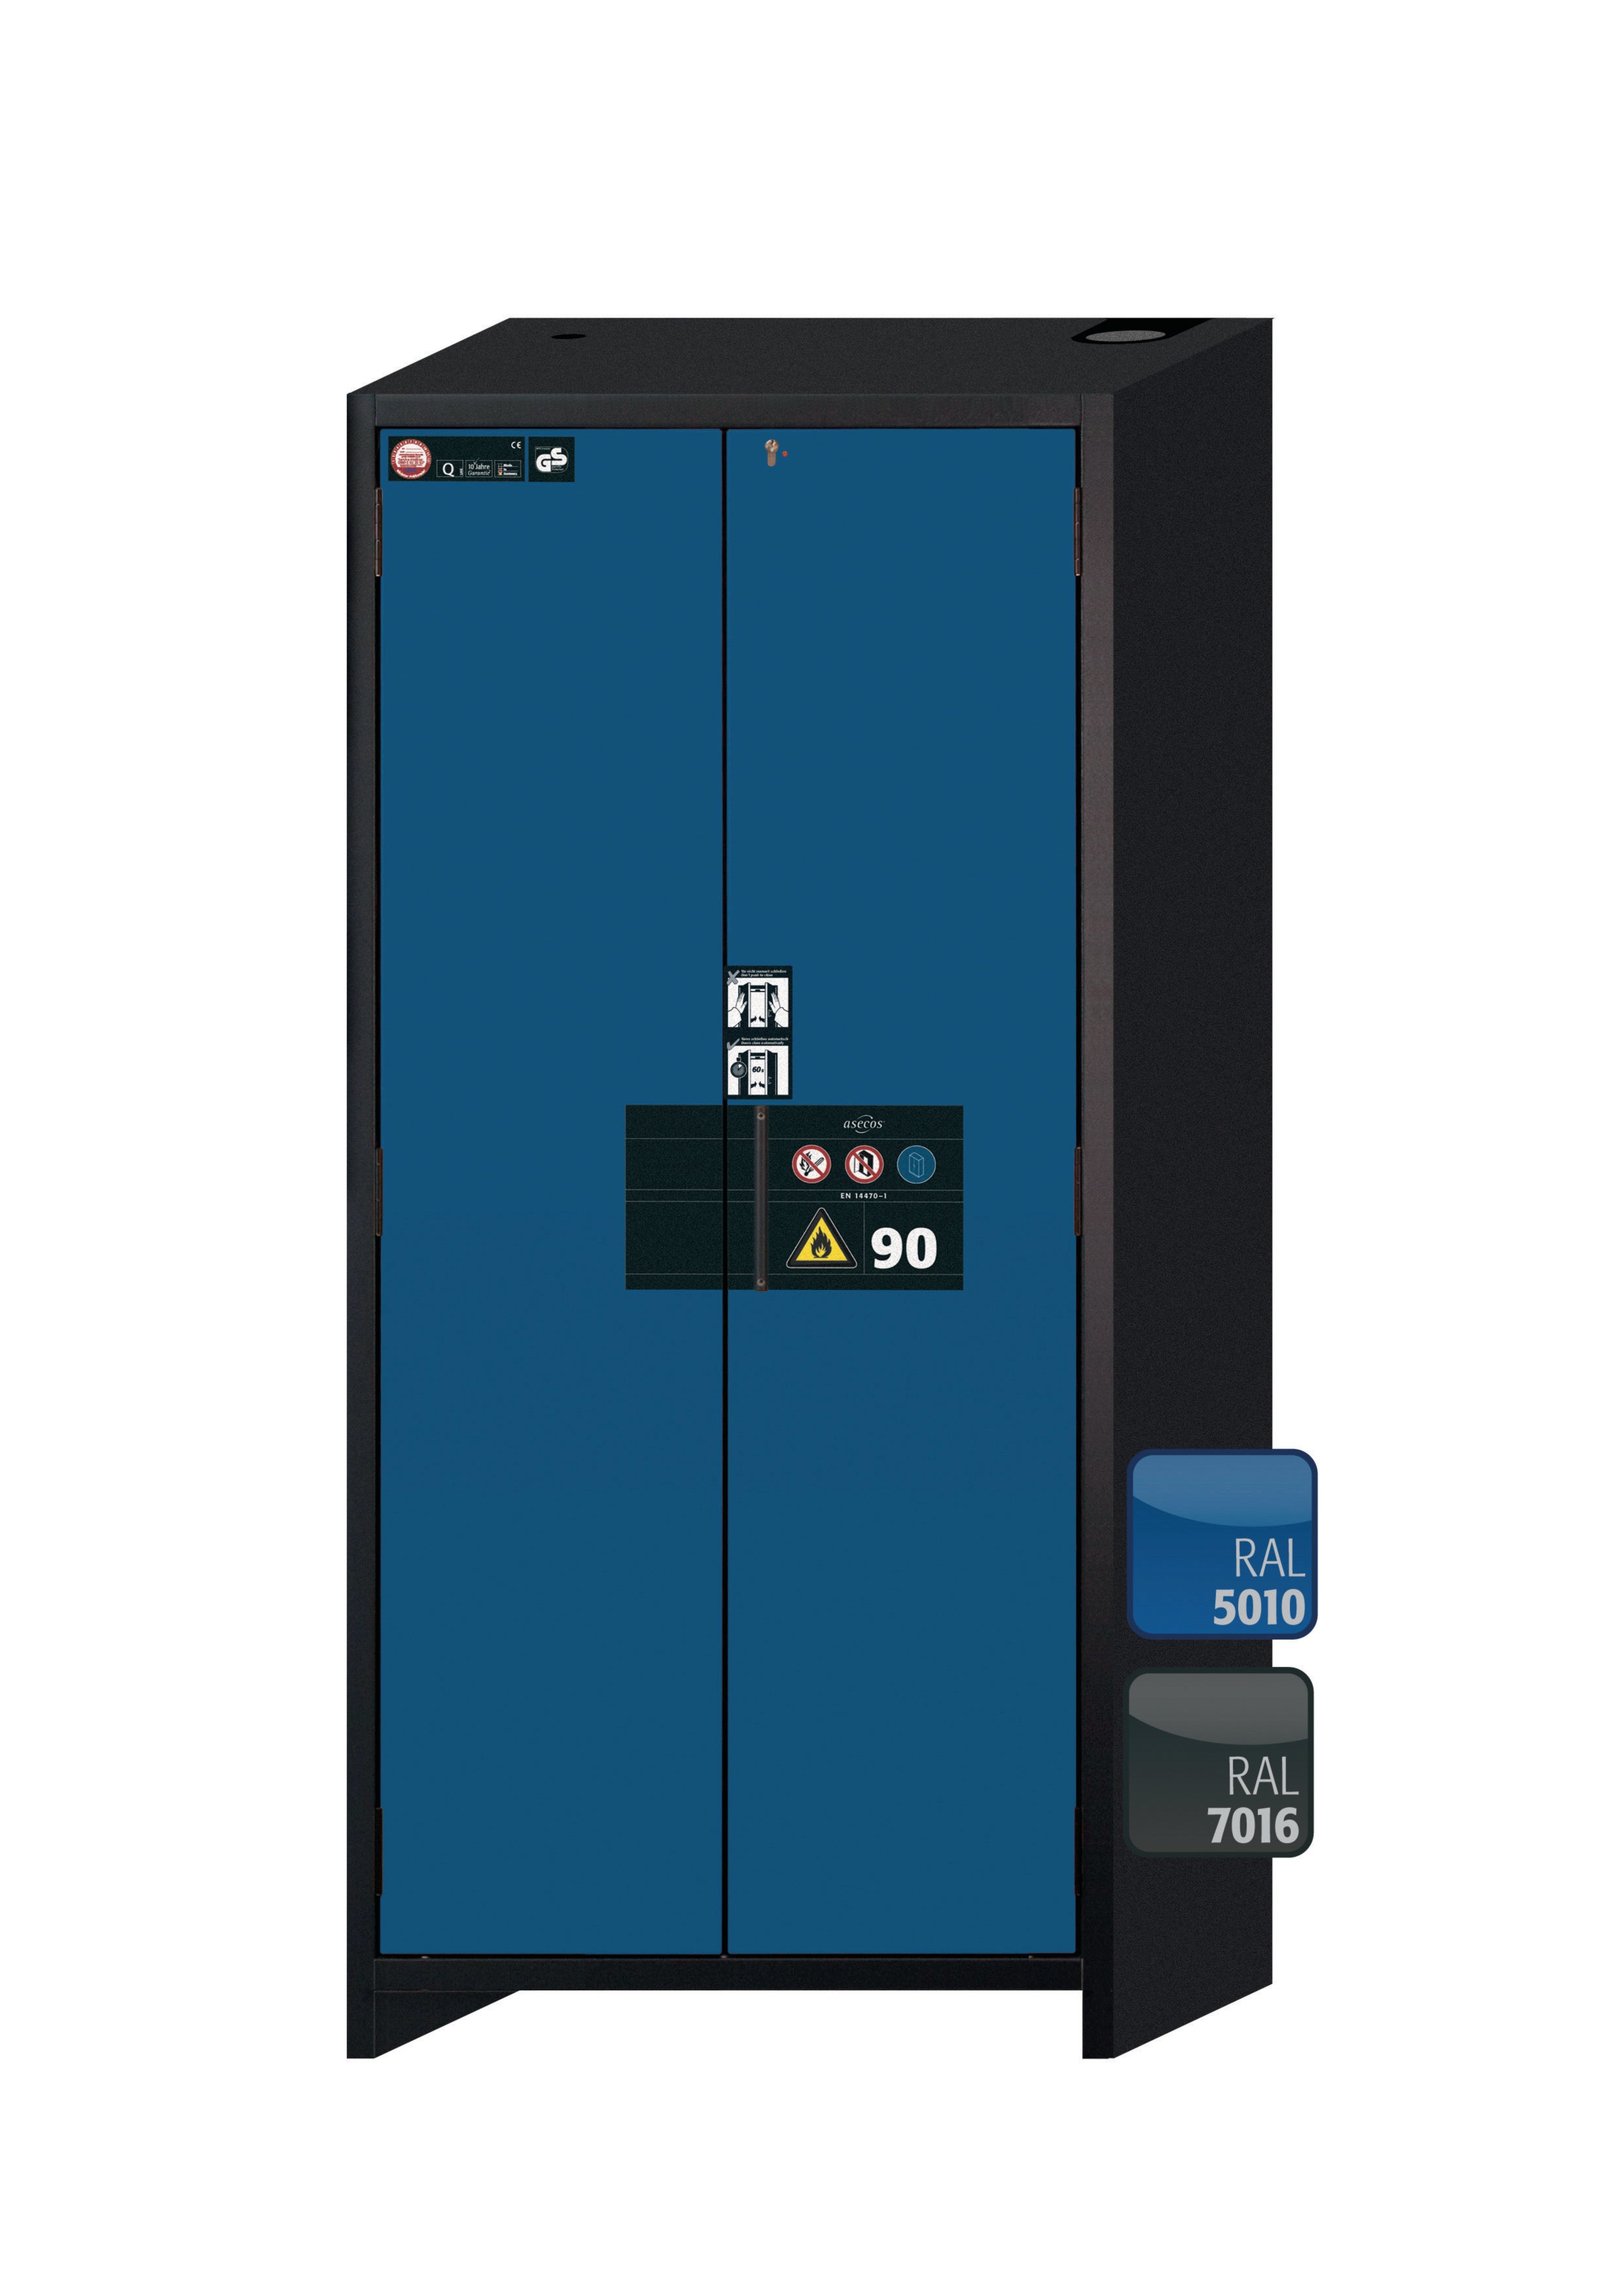 Type 90 safety storage cabinet Q-PEGASUS-90 model Q90.195.090.WDAC in gentian blue RAL 5010 with 4x drawer (standard) (stainless steel 1.4301),